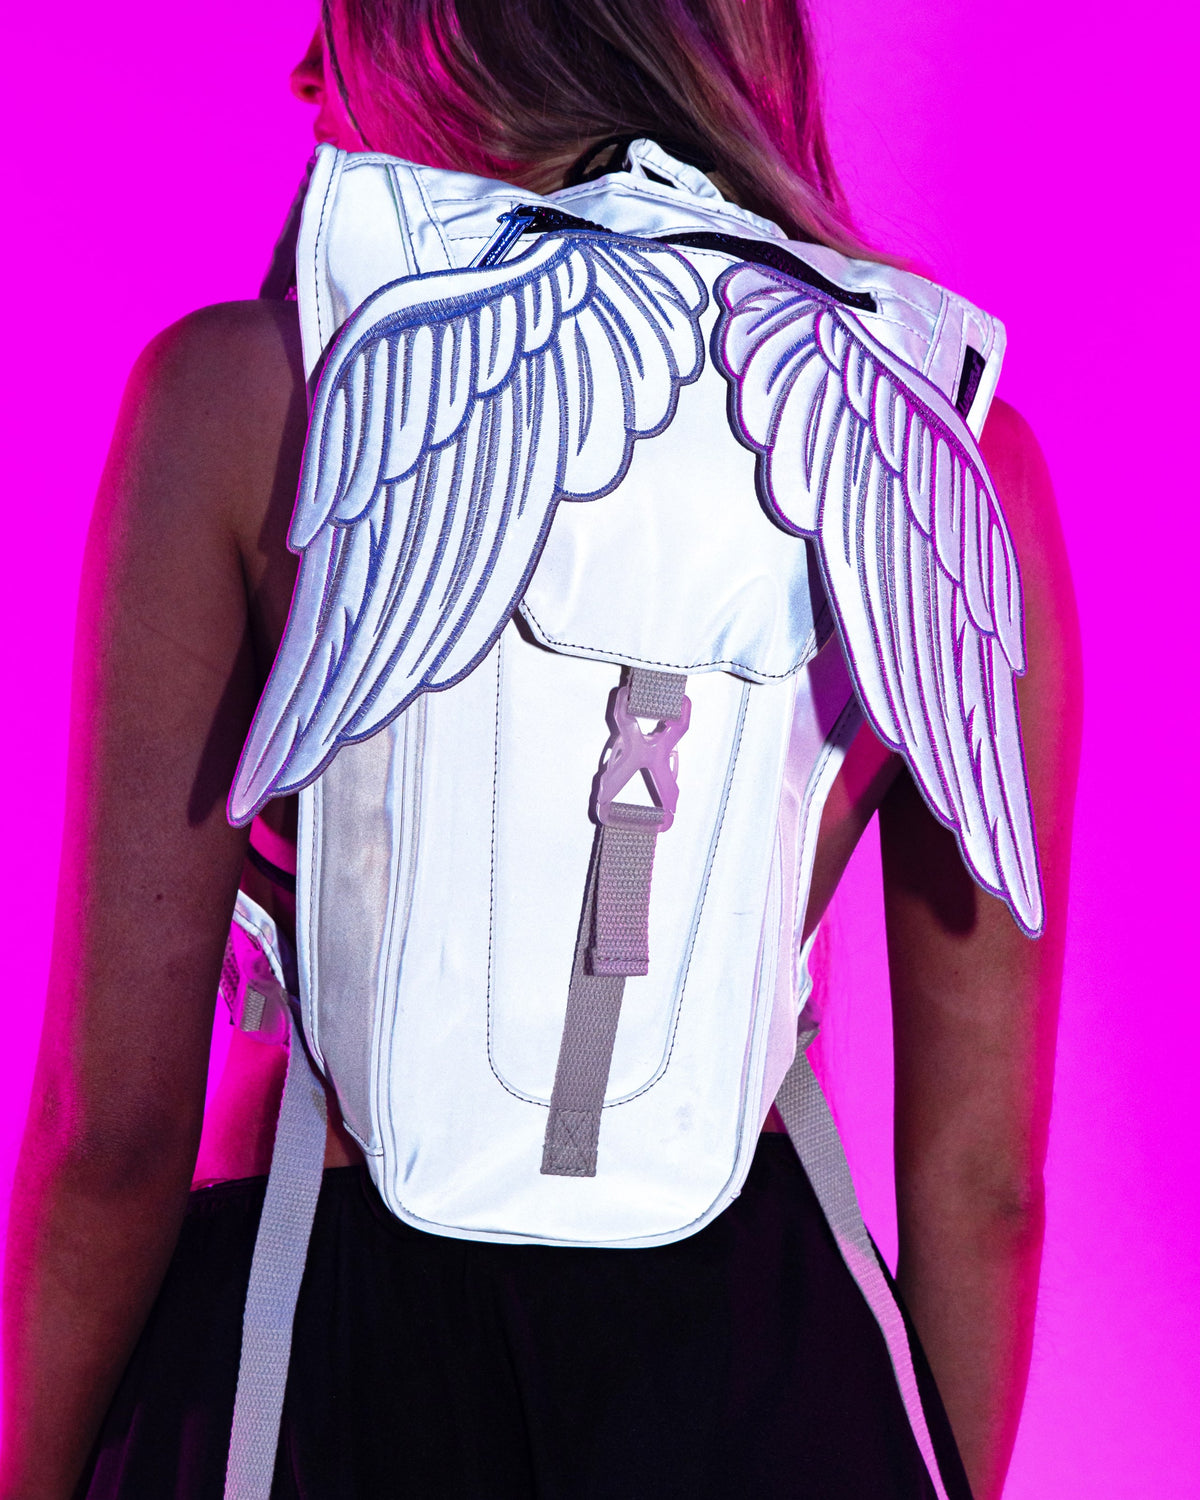 Reflective Silver Angel Wings Hydration Backpack